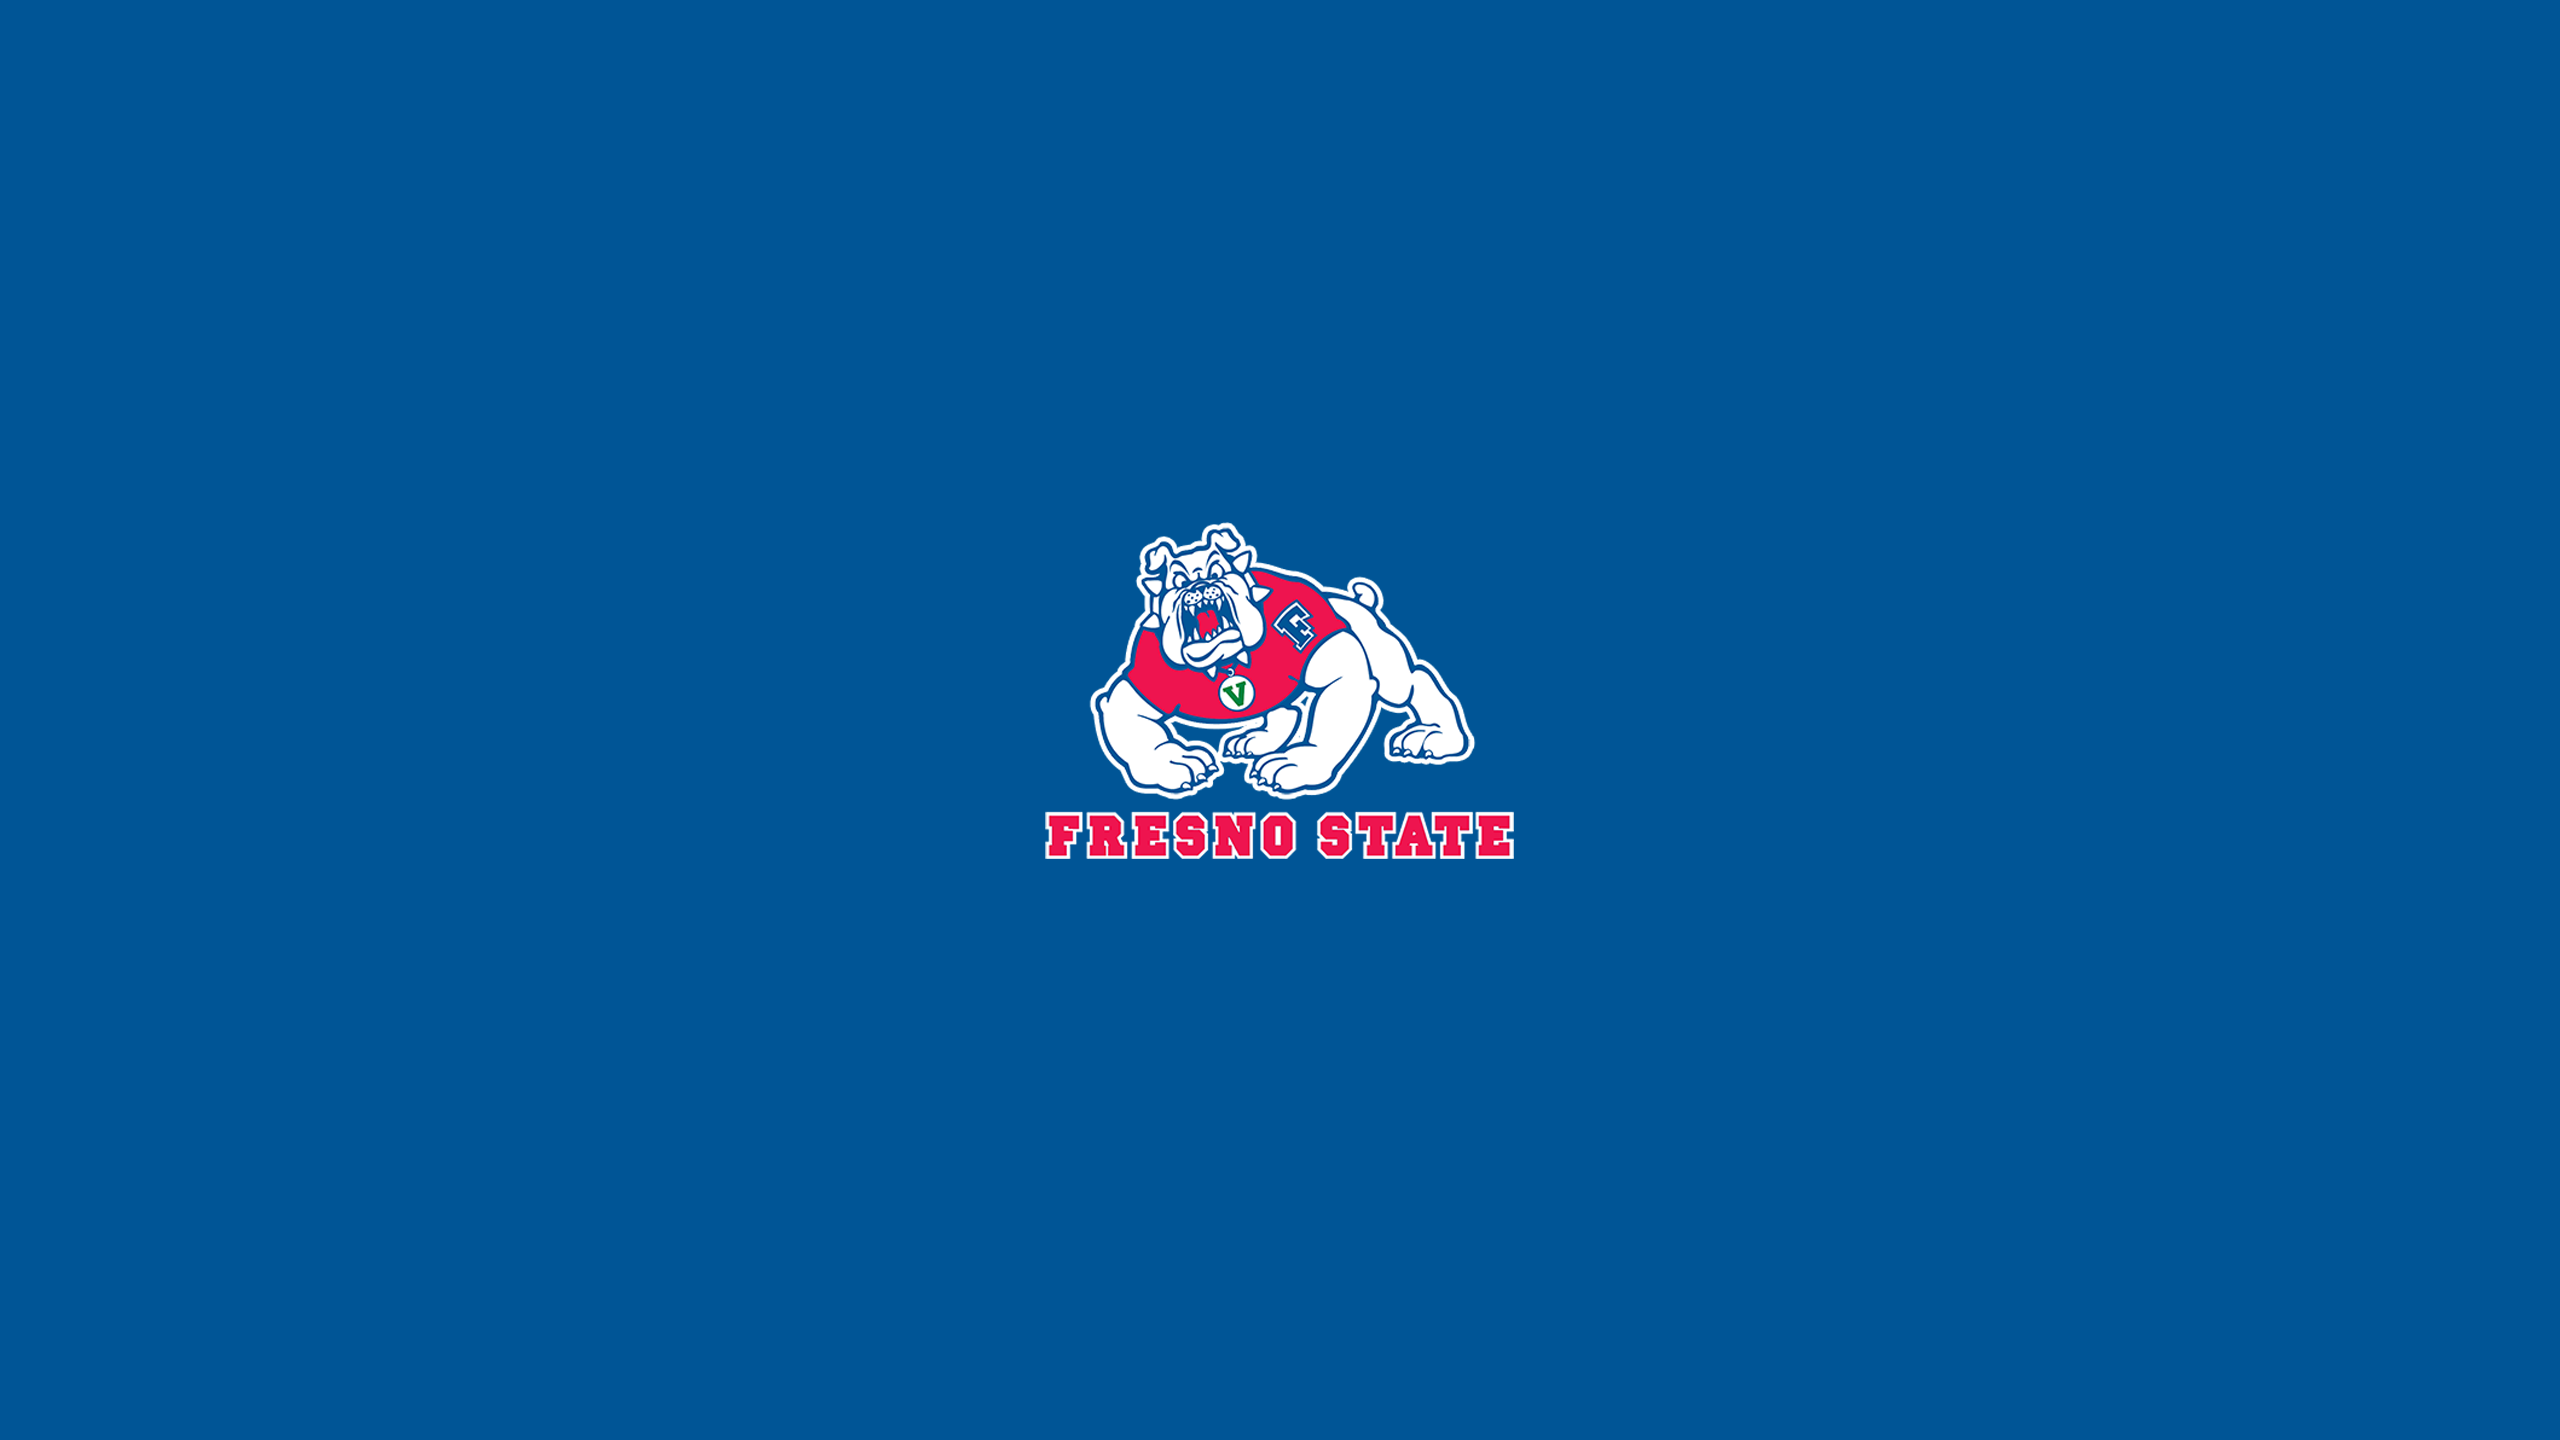 Fresno State Bulldogs Football - NCAAF - Square Bettor